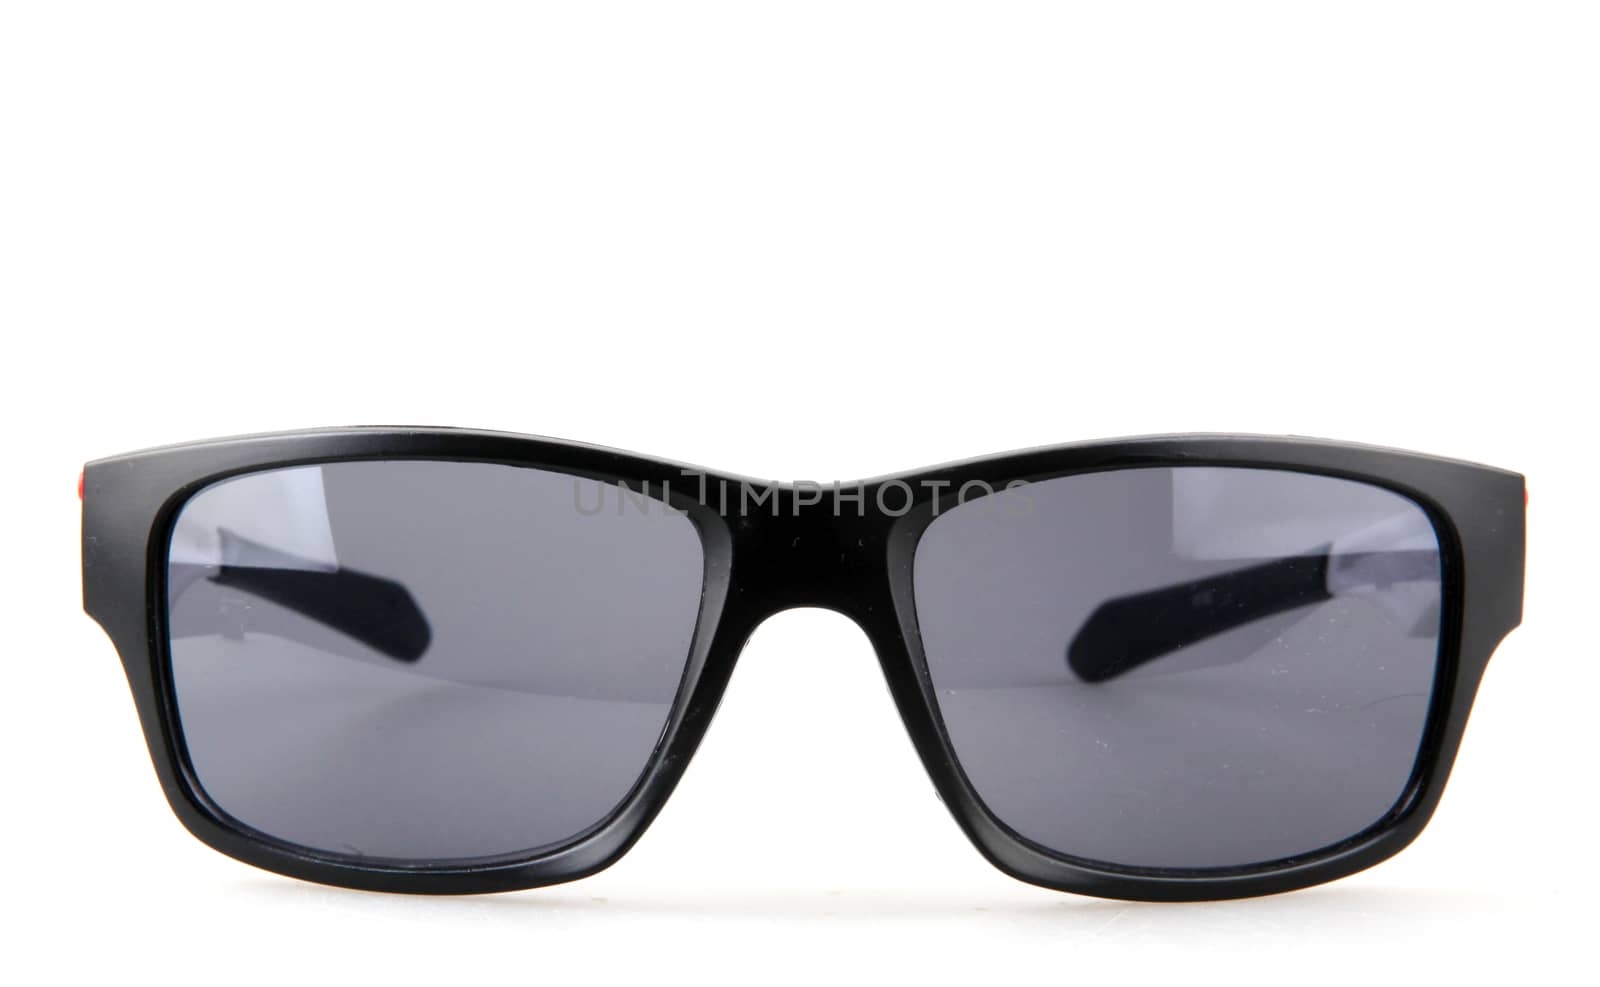 Close-Up Of Sunglasses Against White Background by nenovbrothers